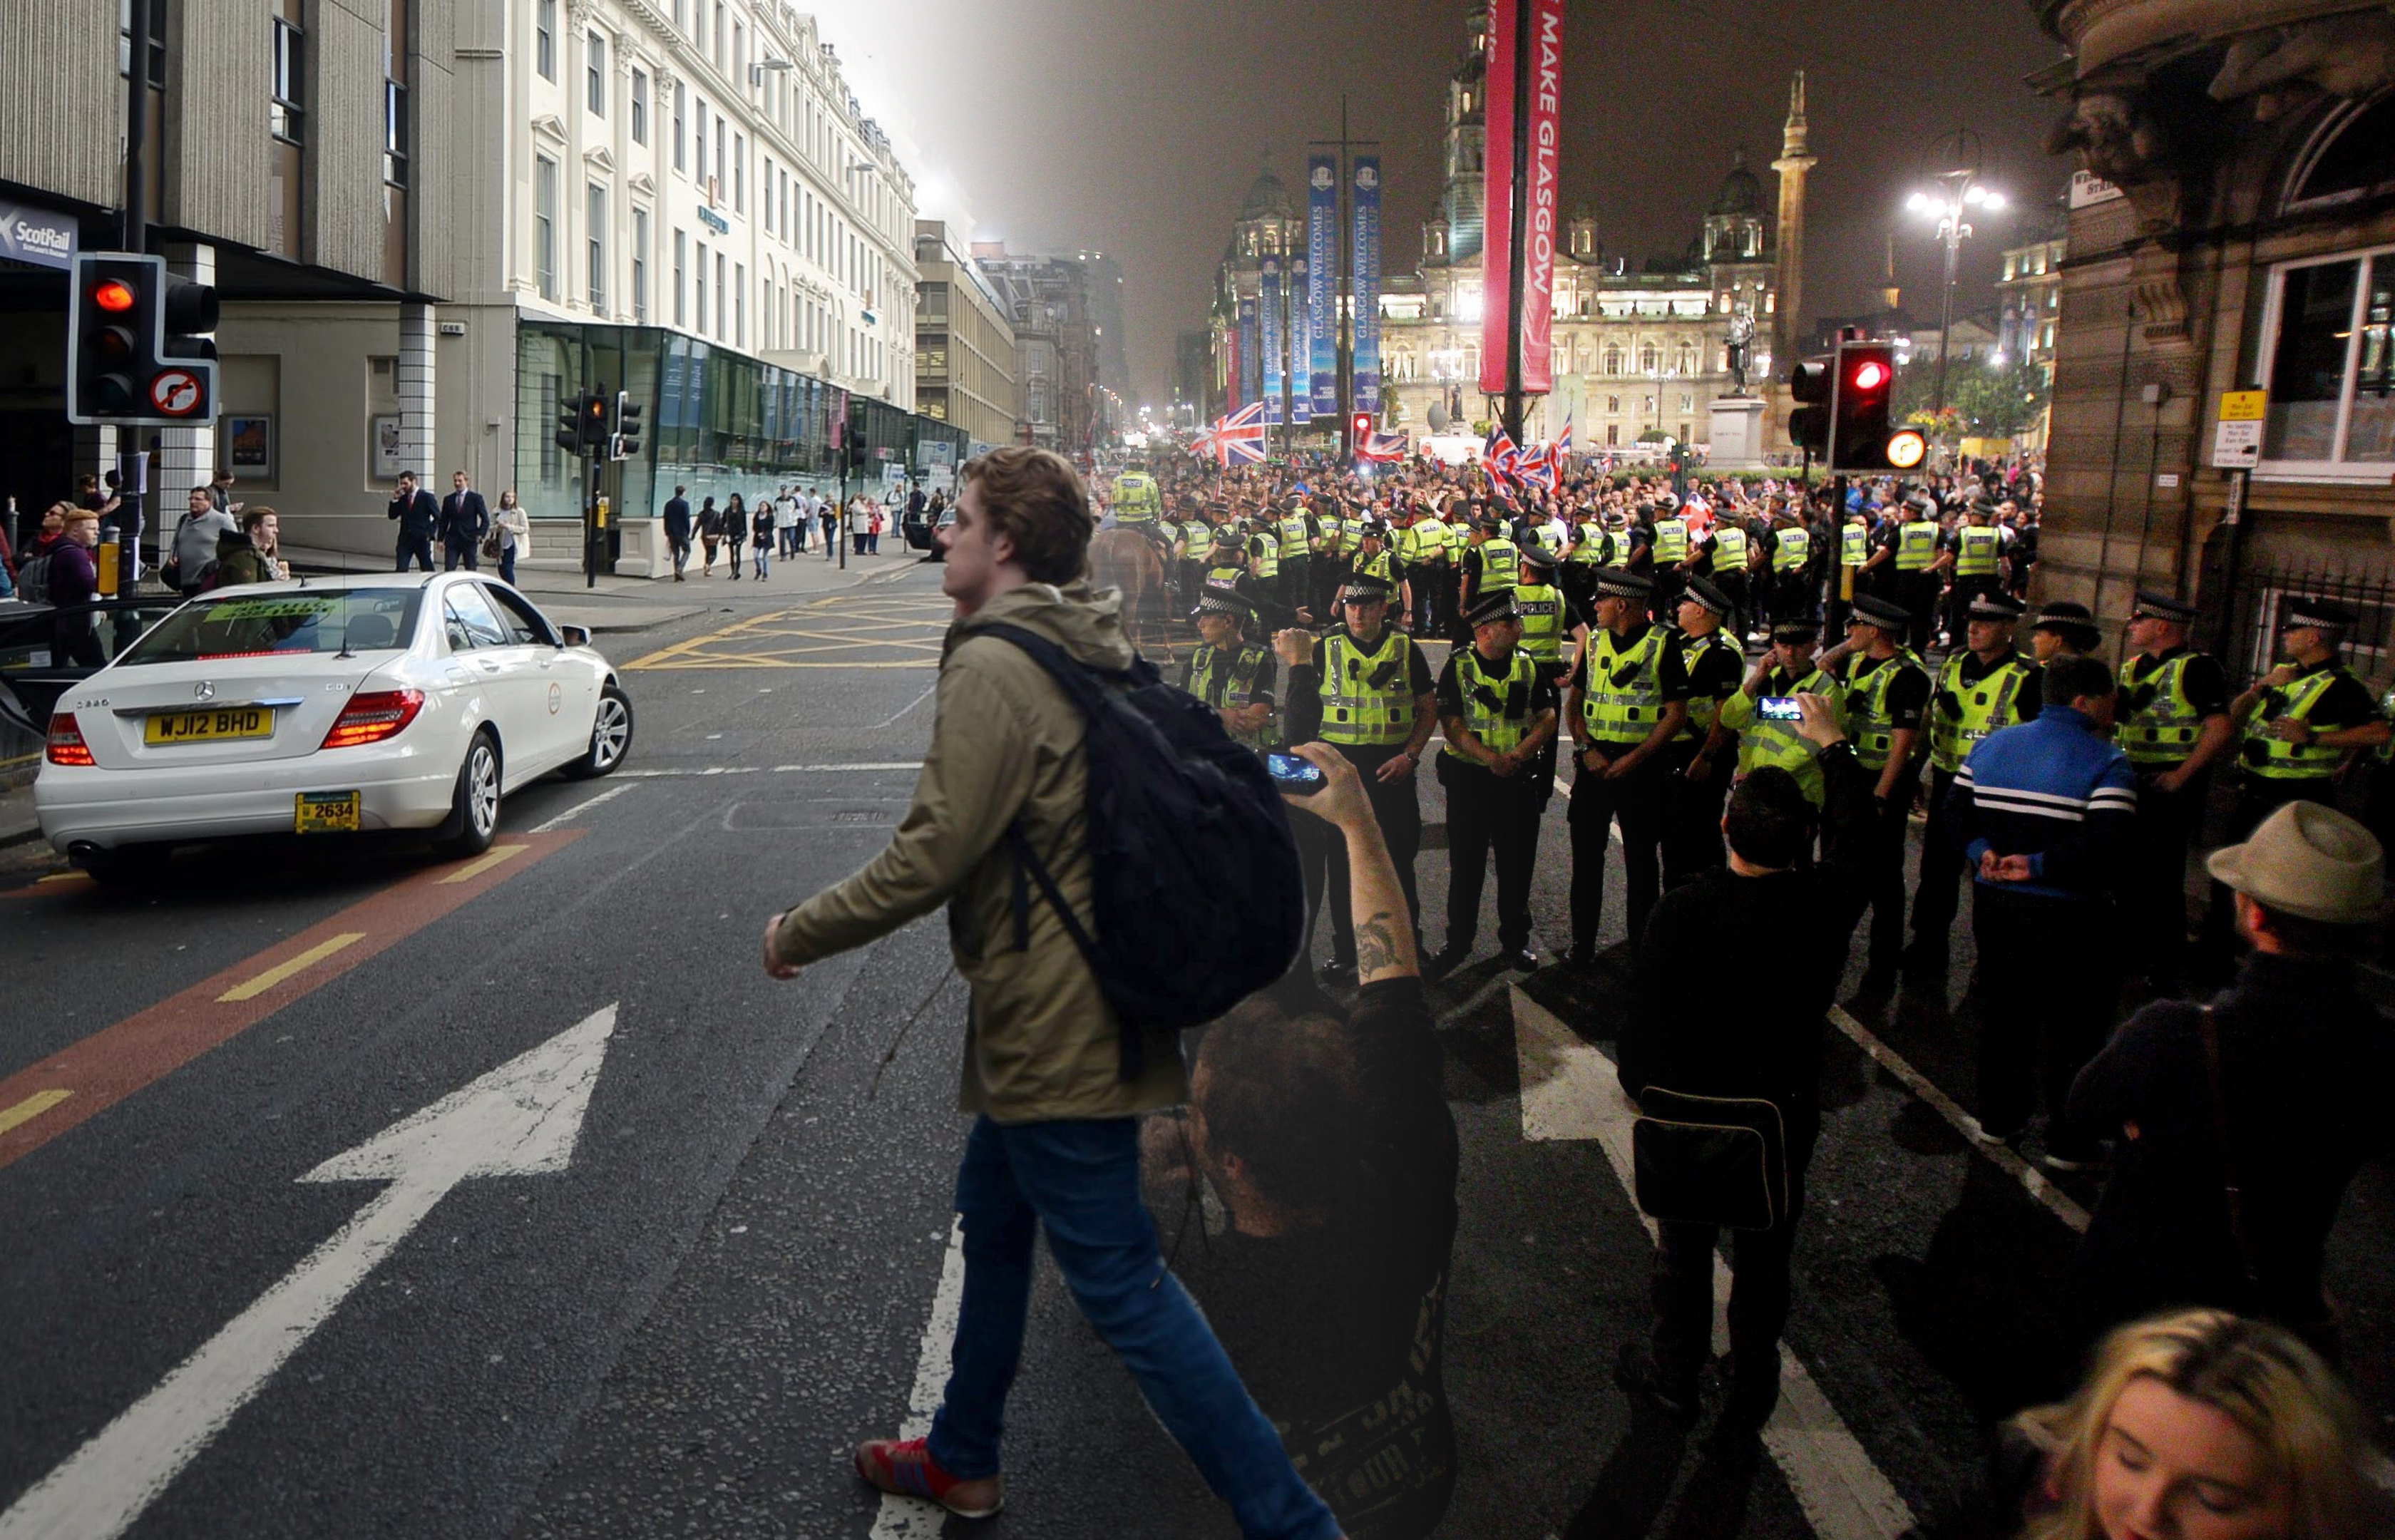 Then and now: Police stand guard at George Square as a confrontation between Yes and No supporters threatens to descend into violence 